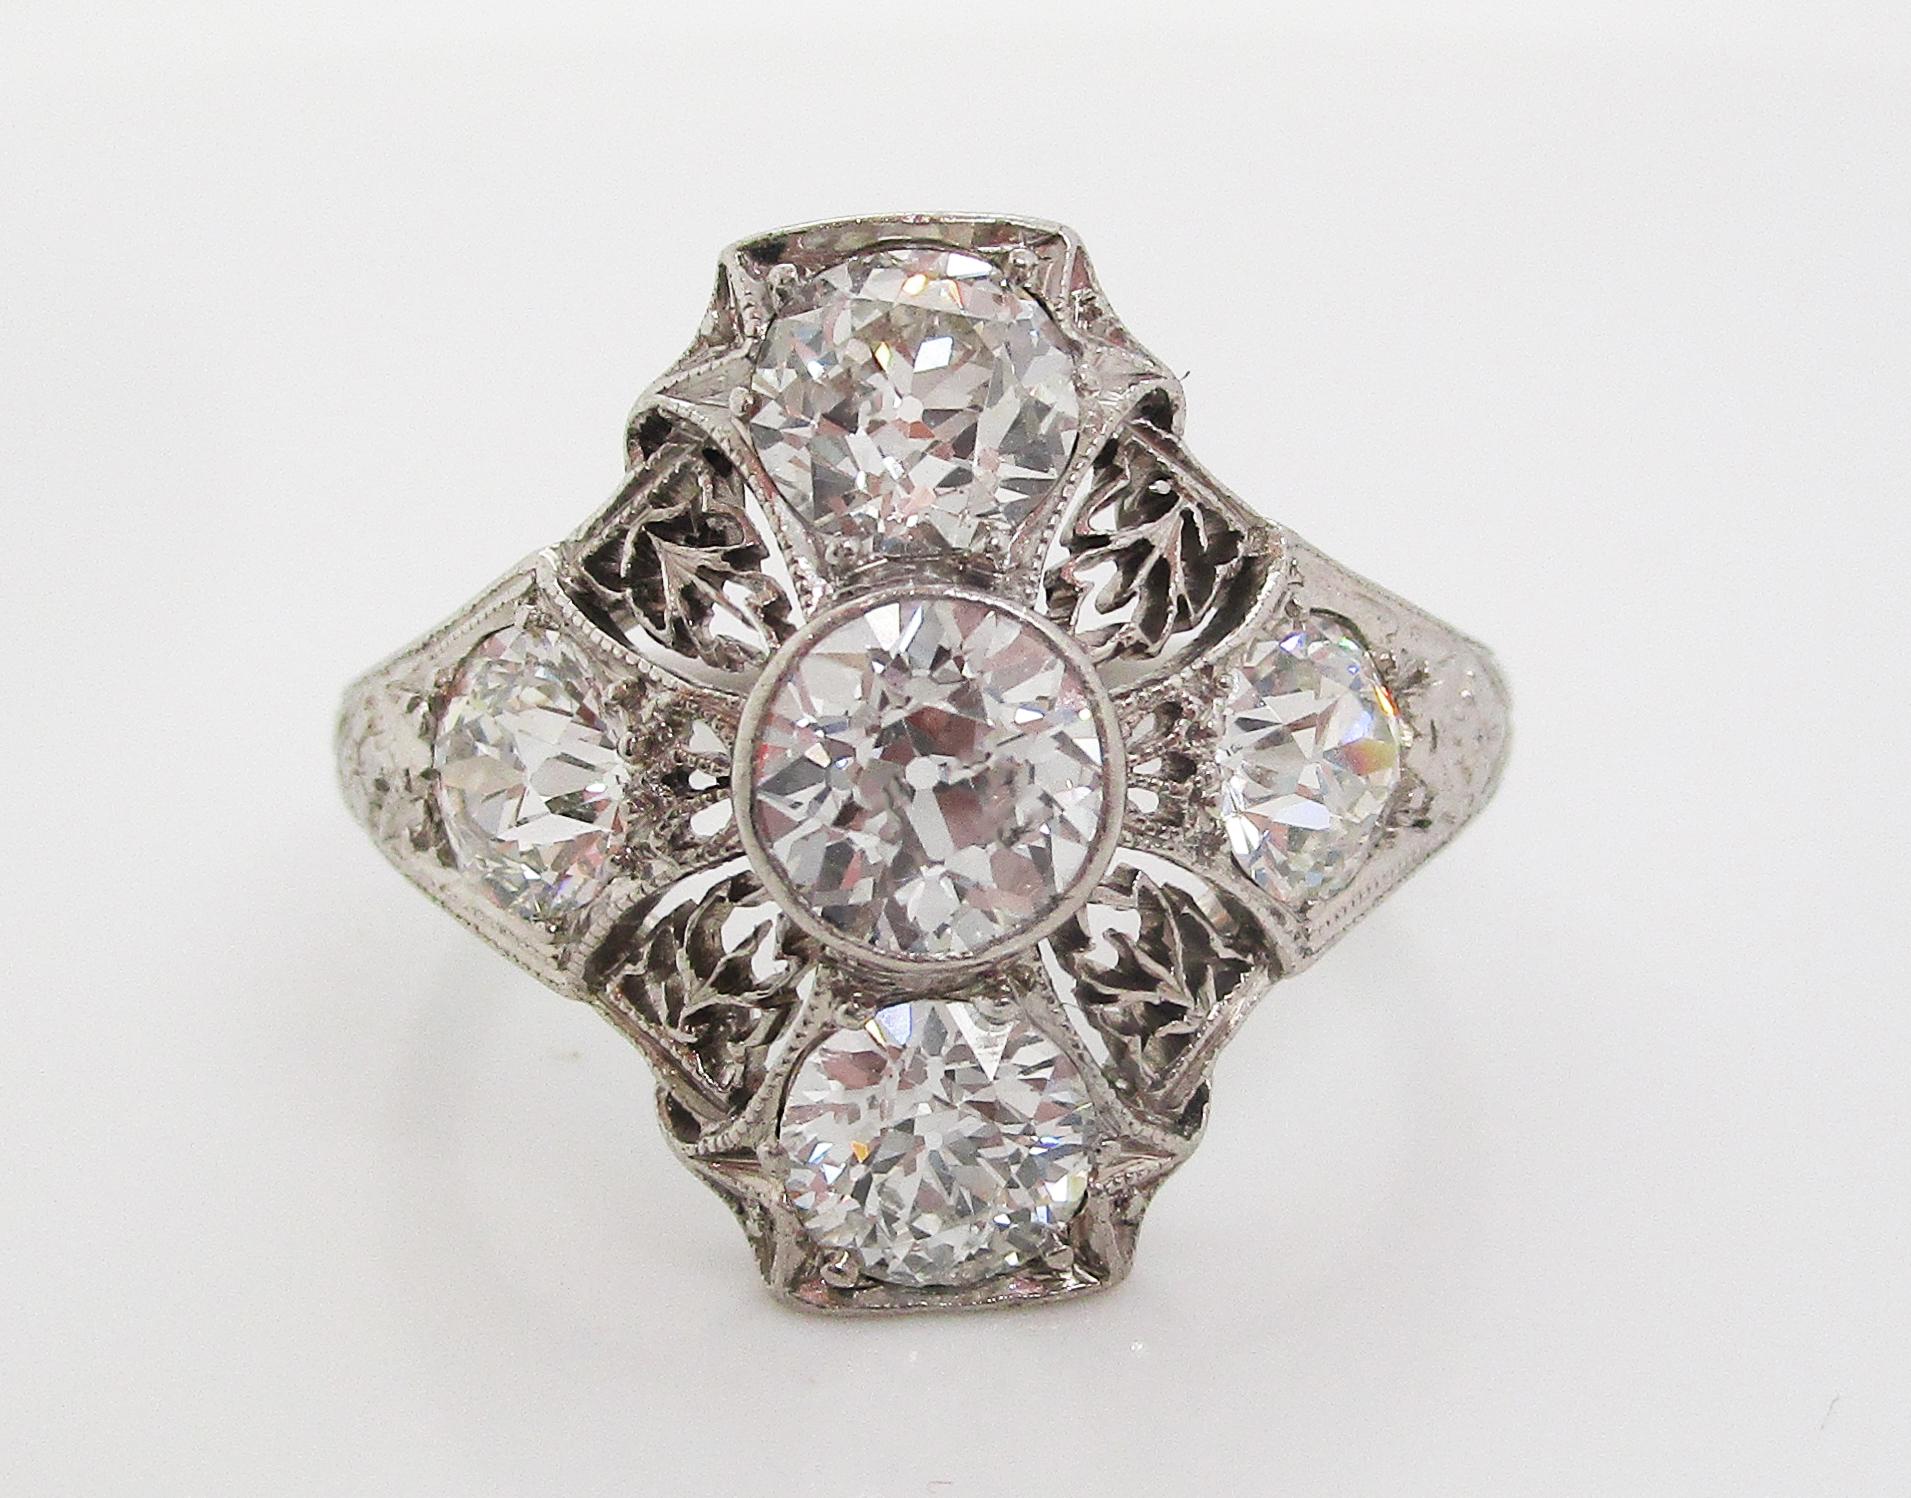 This absolutely remarkable Deco ring is in platinum with fine filigree and engraved details and boasts five breathtakingly fiery white mine cut diamonds. The unique layout of the ring features a diamond center and an almost flawlessly matched